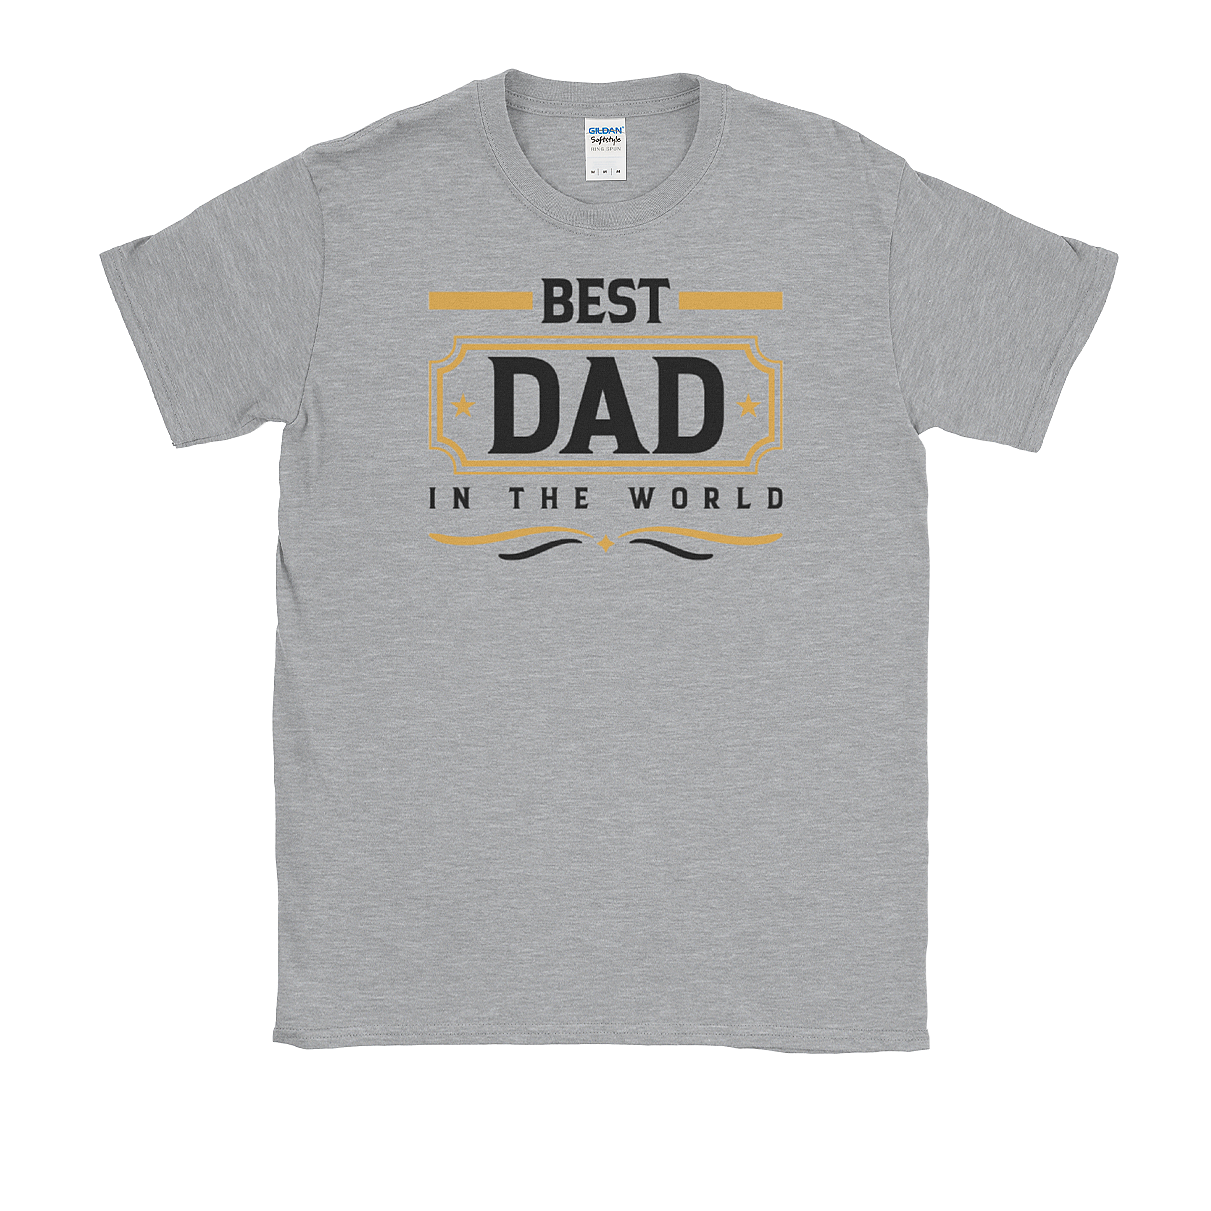 Best Dad in the World Softstyle Tee